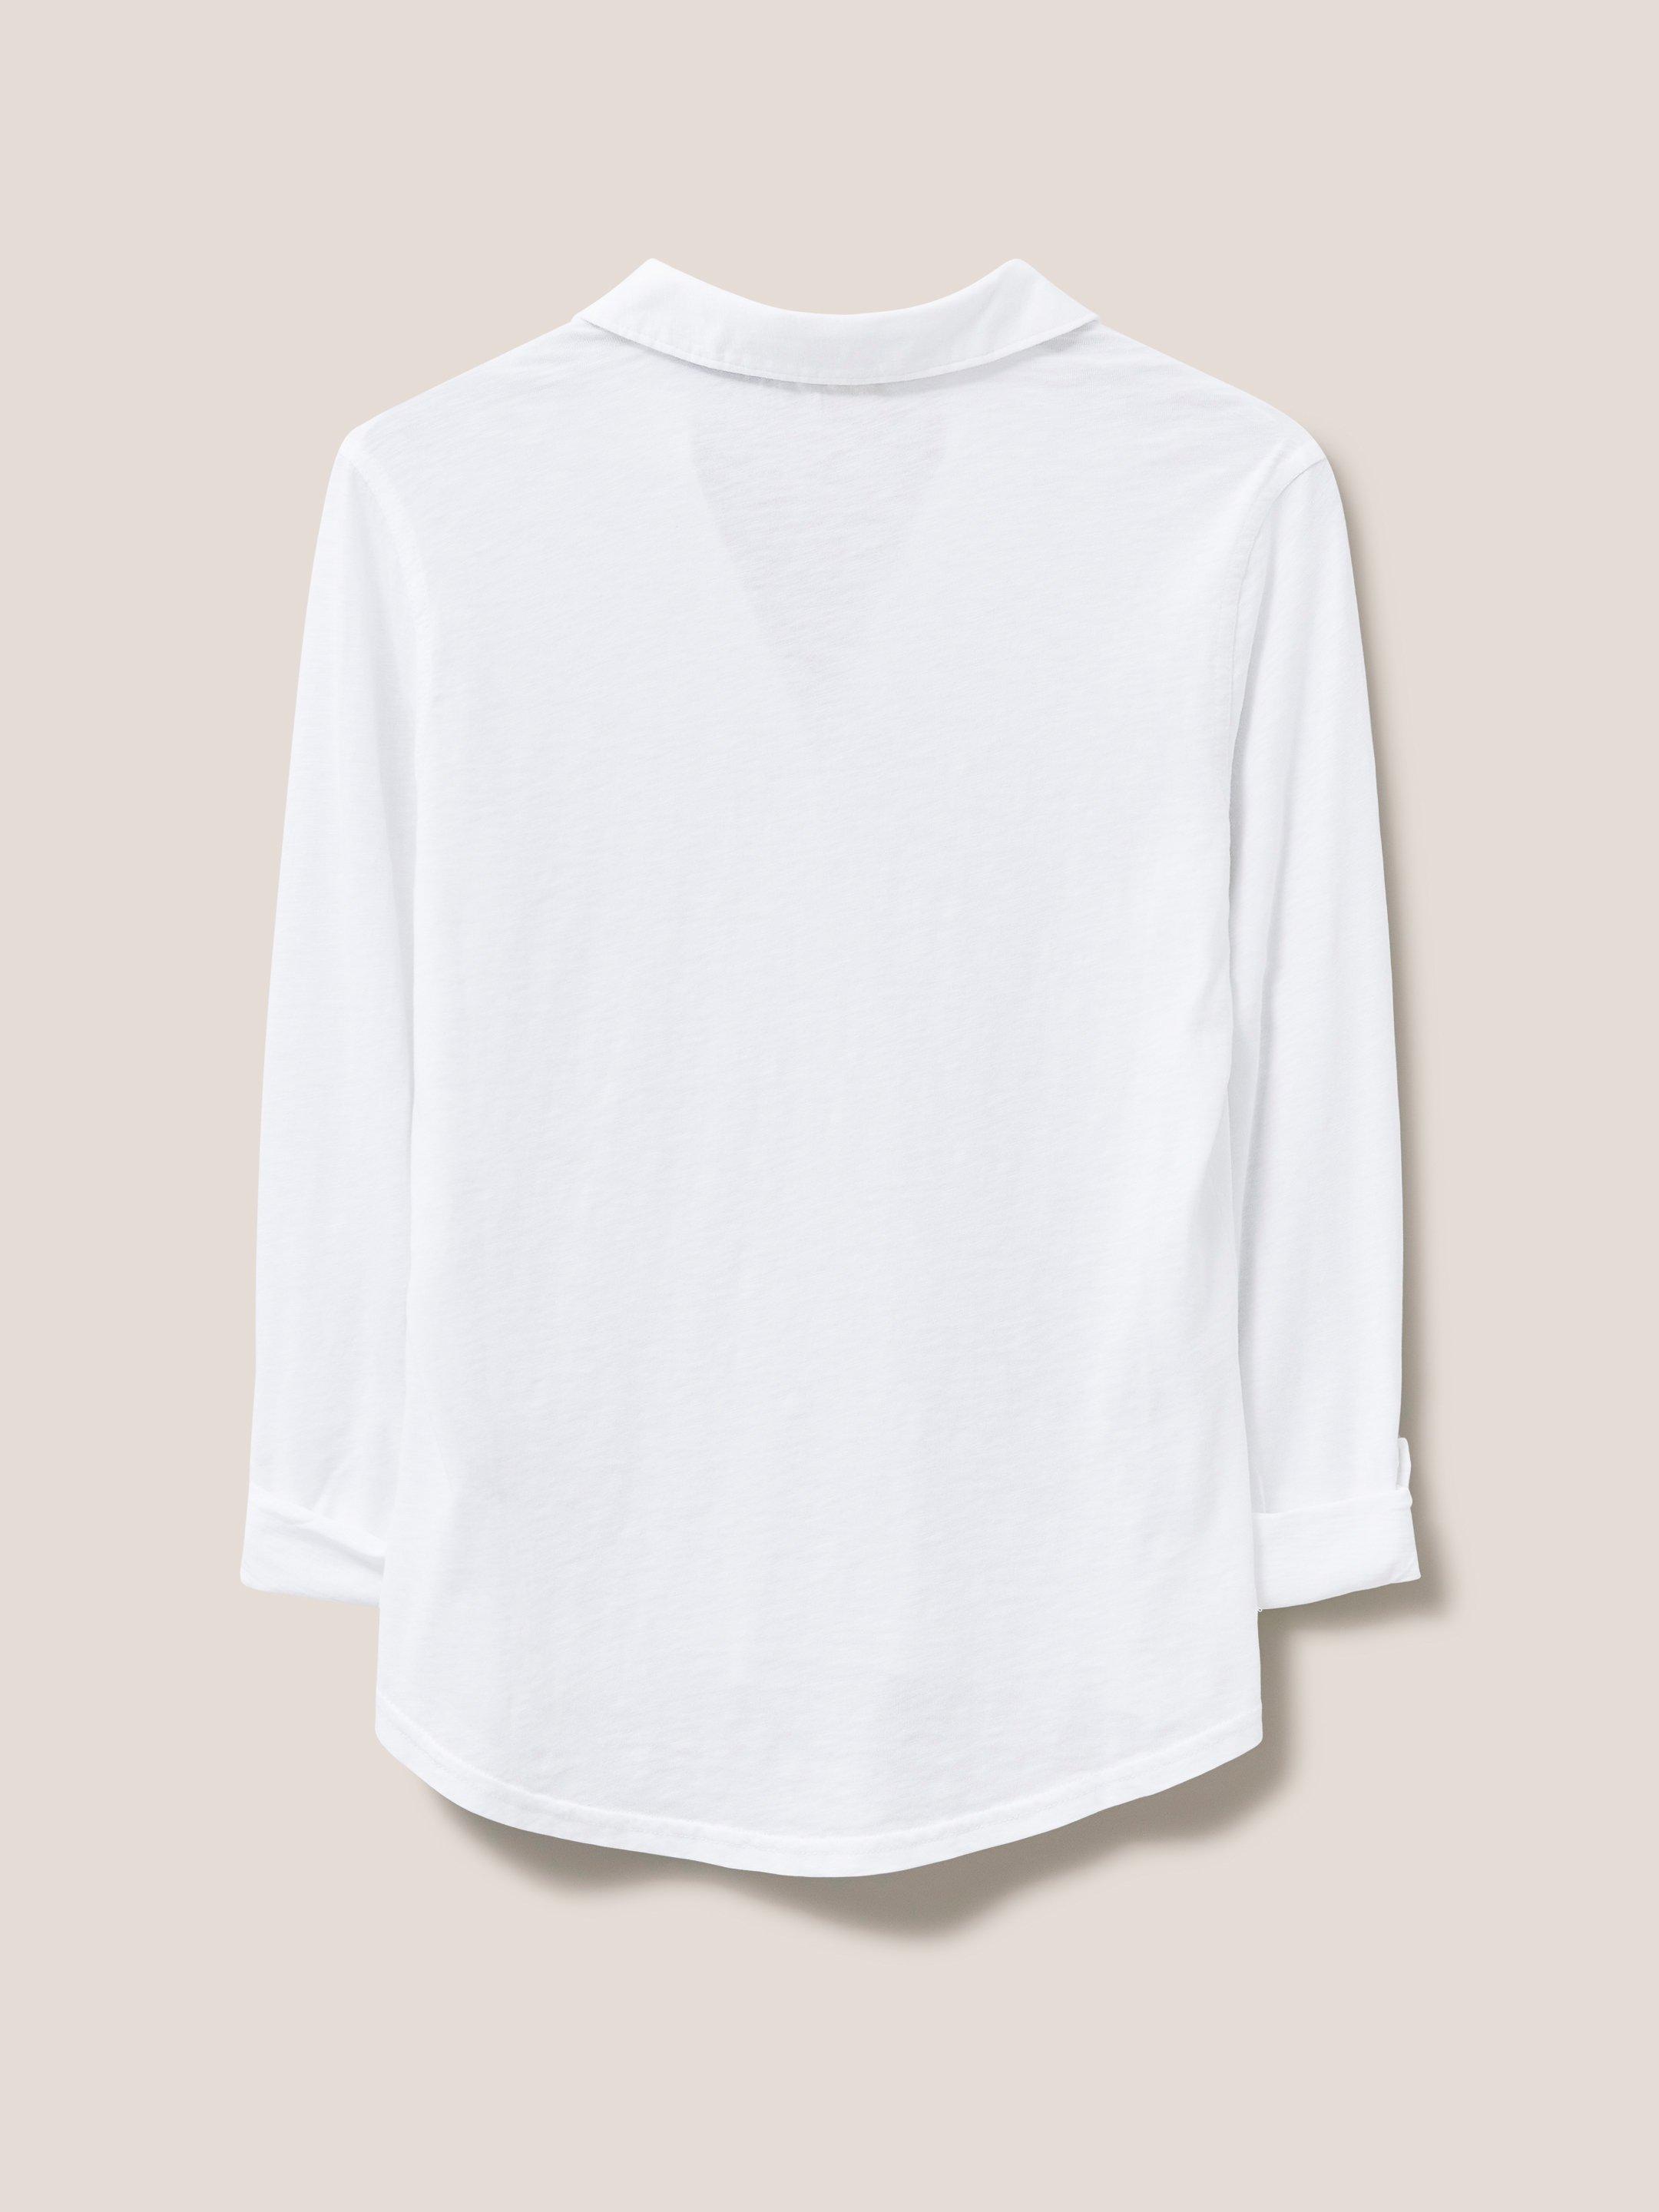 Annie Jersey Shirt in BRIL WHITE - FLAT BACK